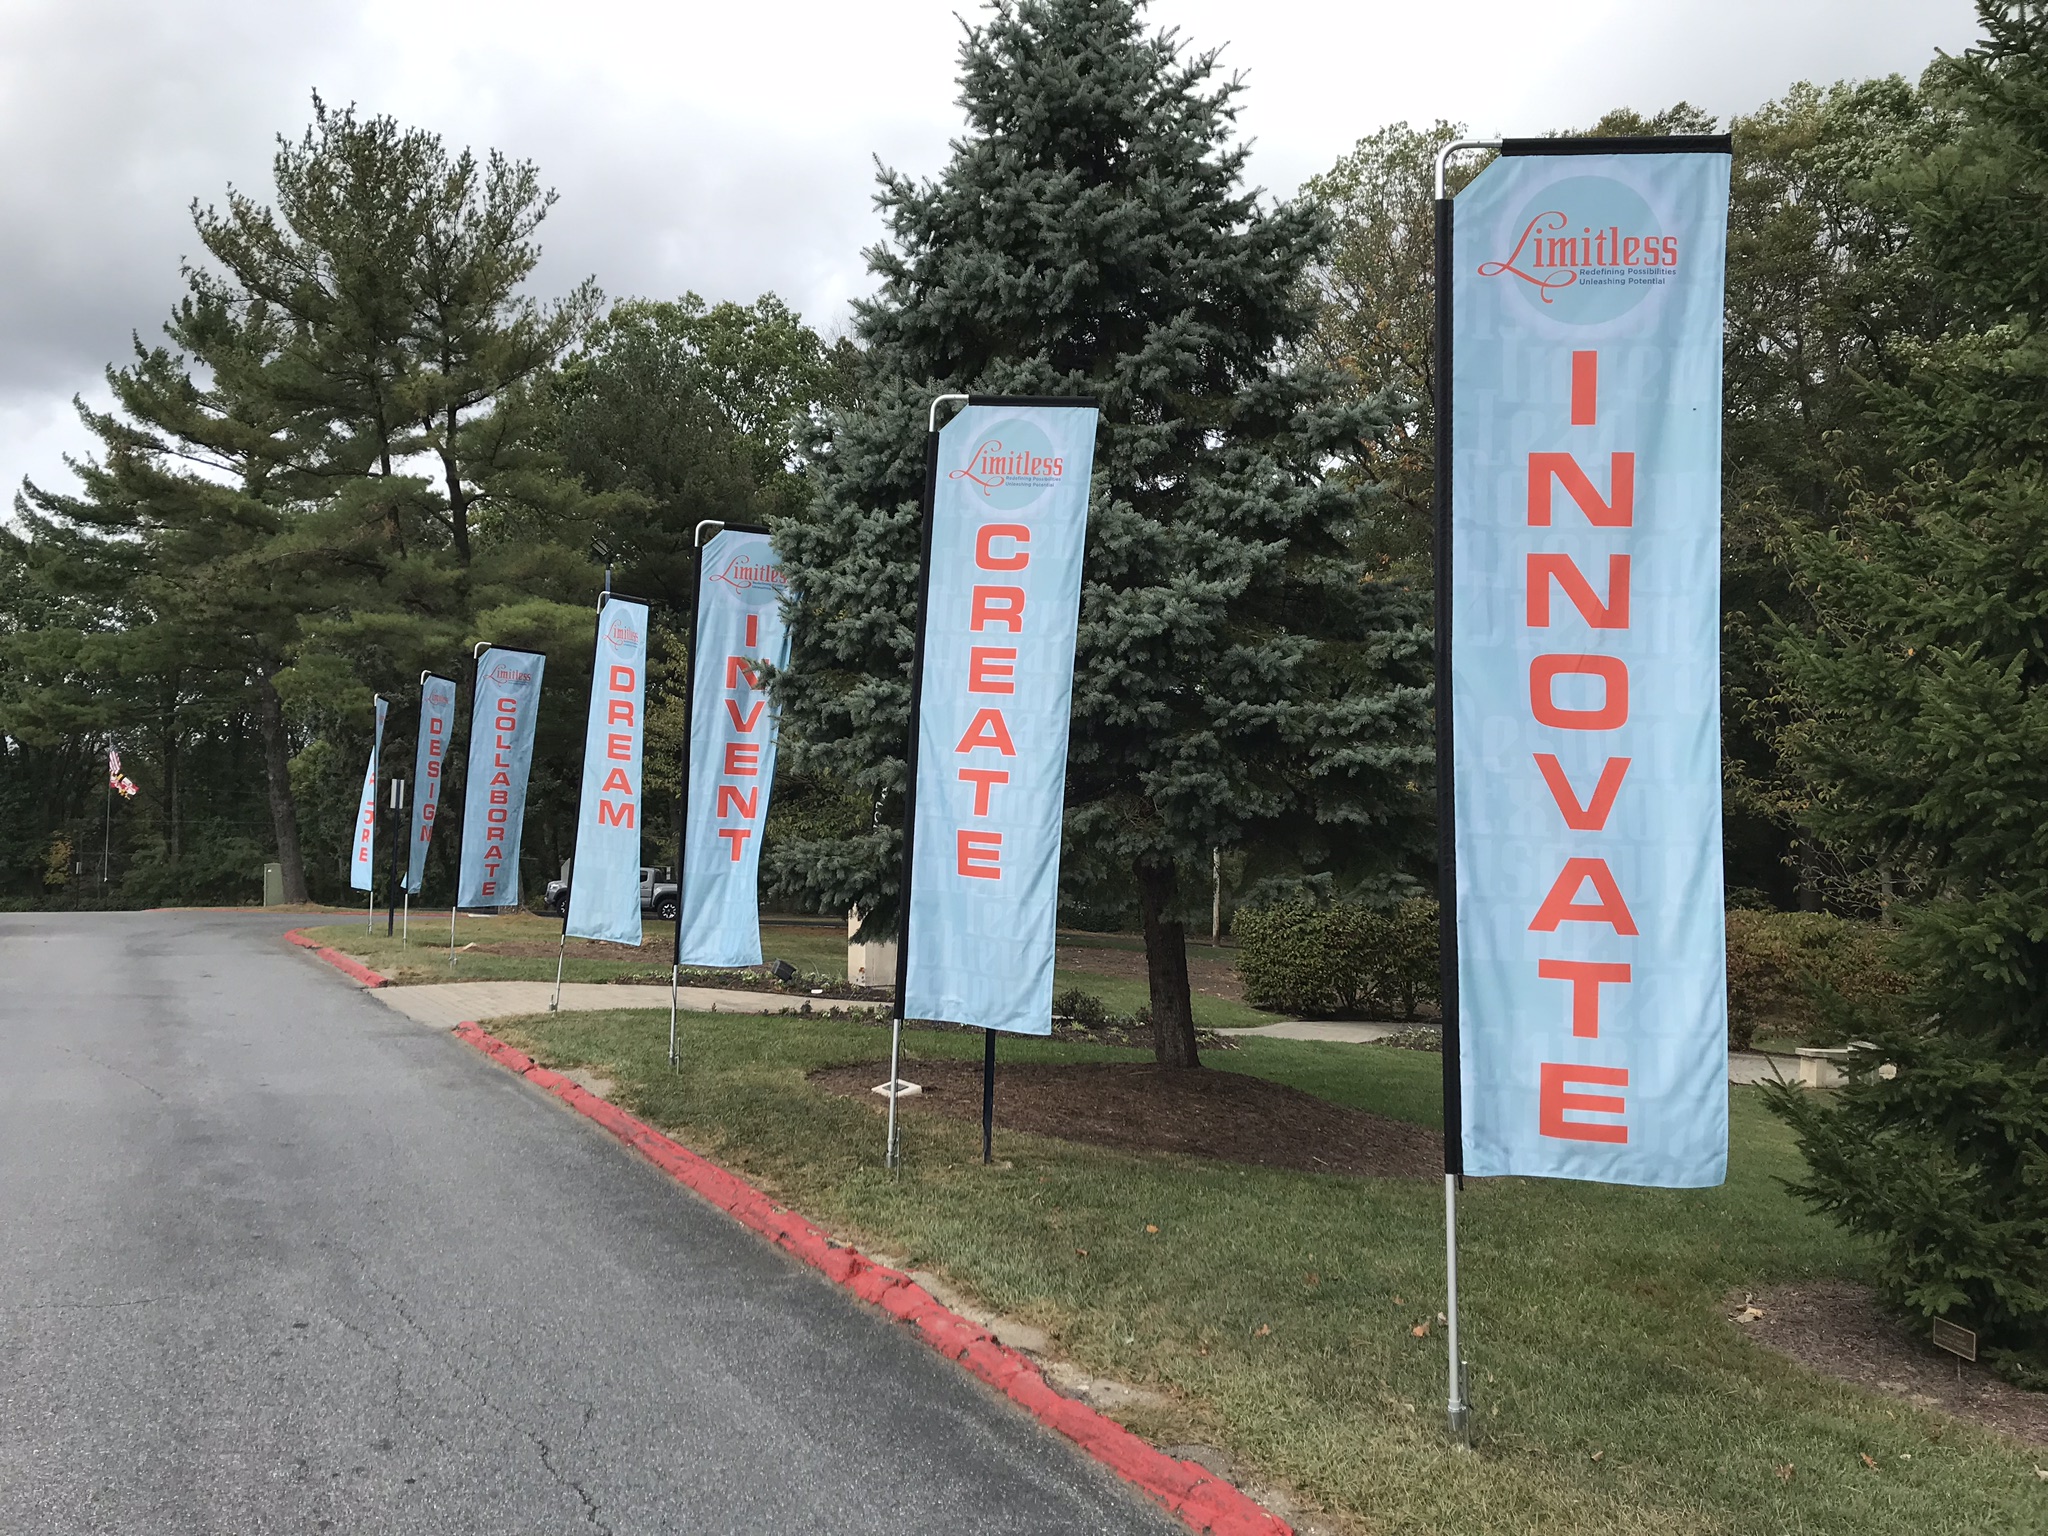 Limitless Roadside Sign Flags